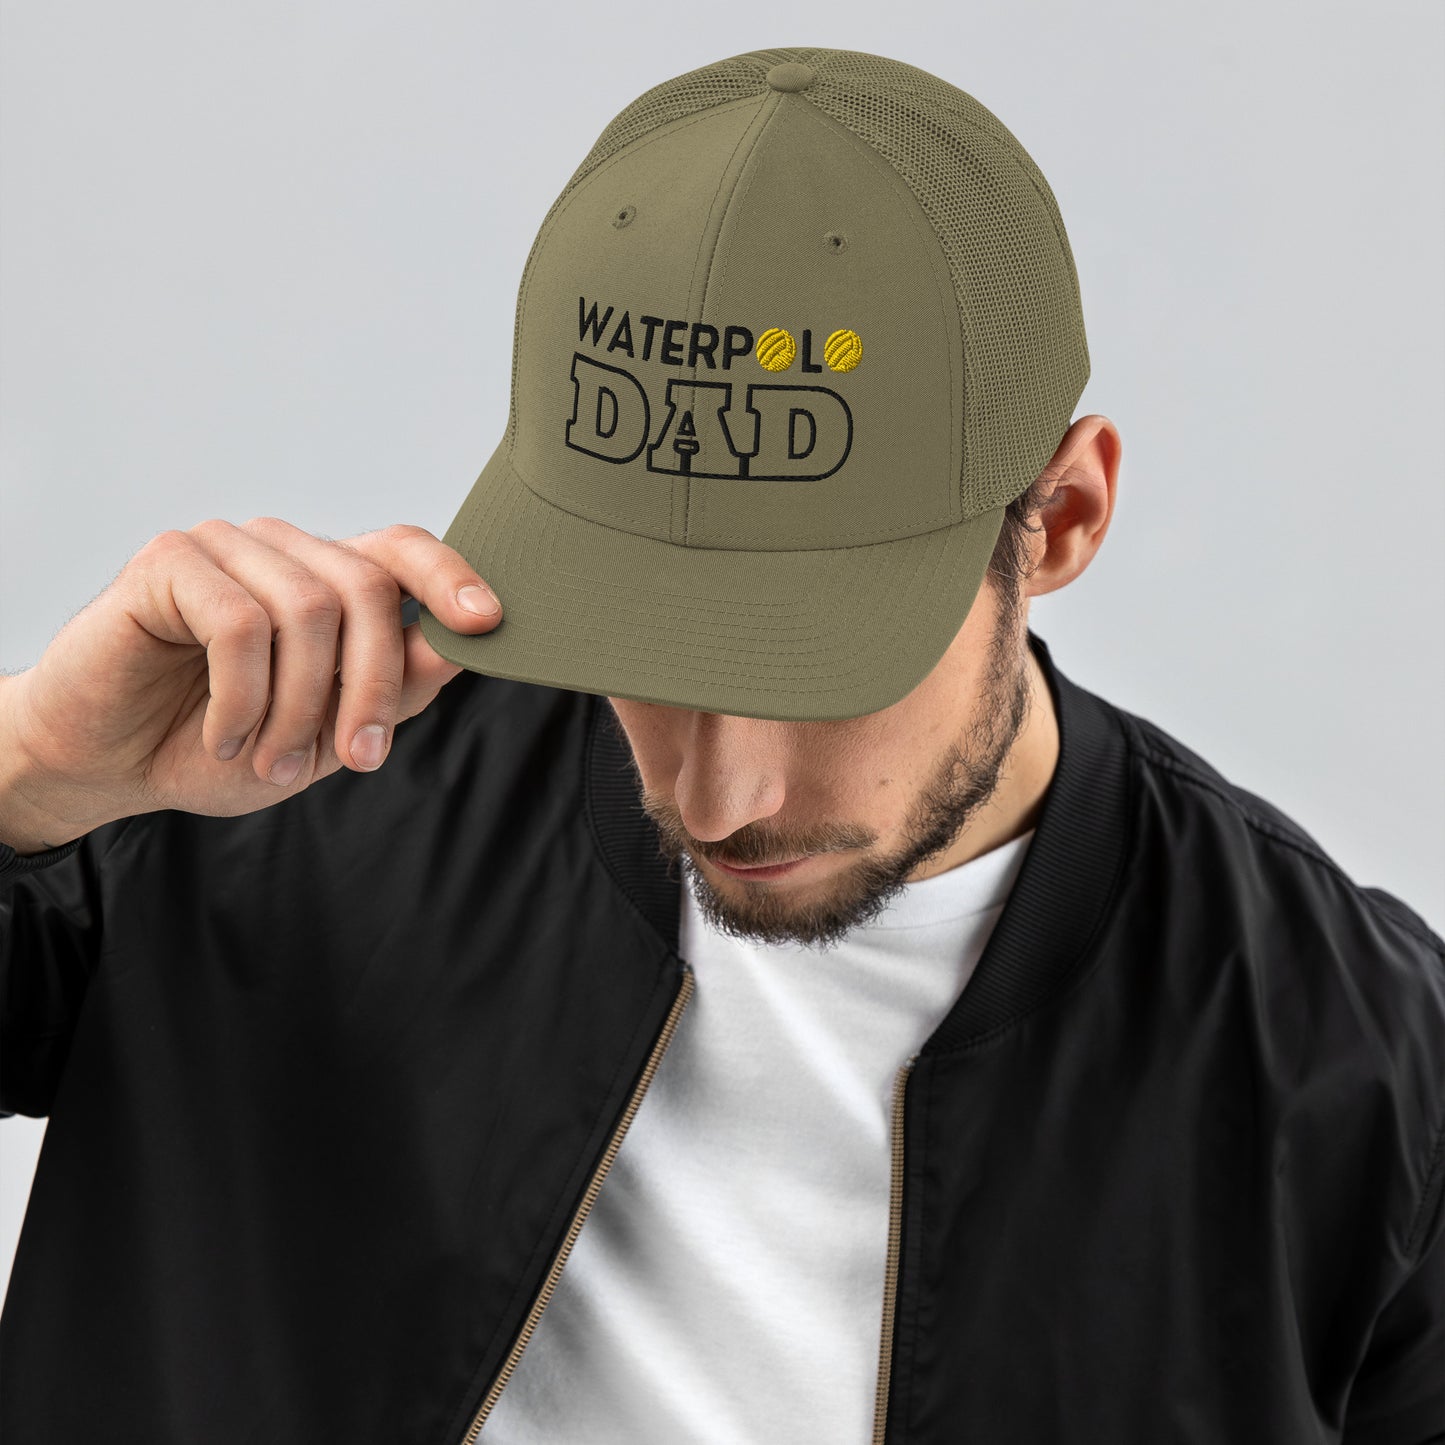 Waterpolo Dad - Embroidered Snapback Trucker Cap | Richardson 112